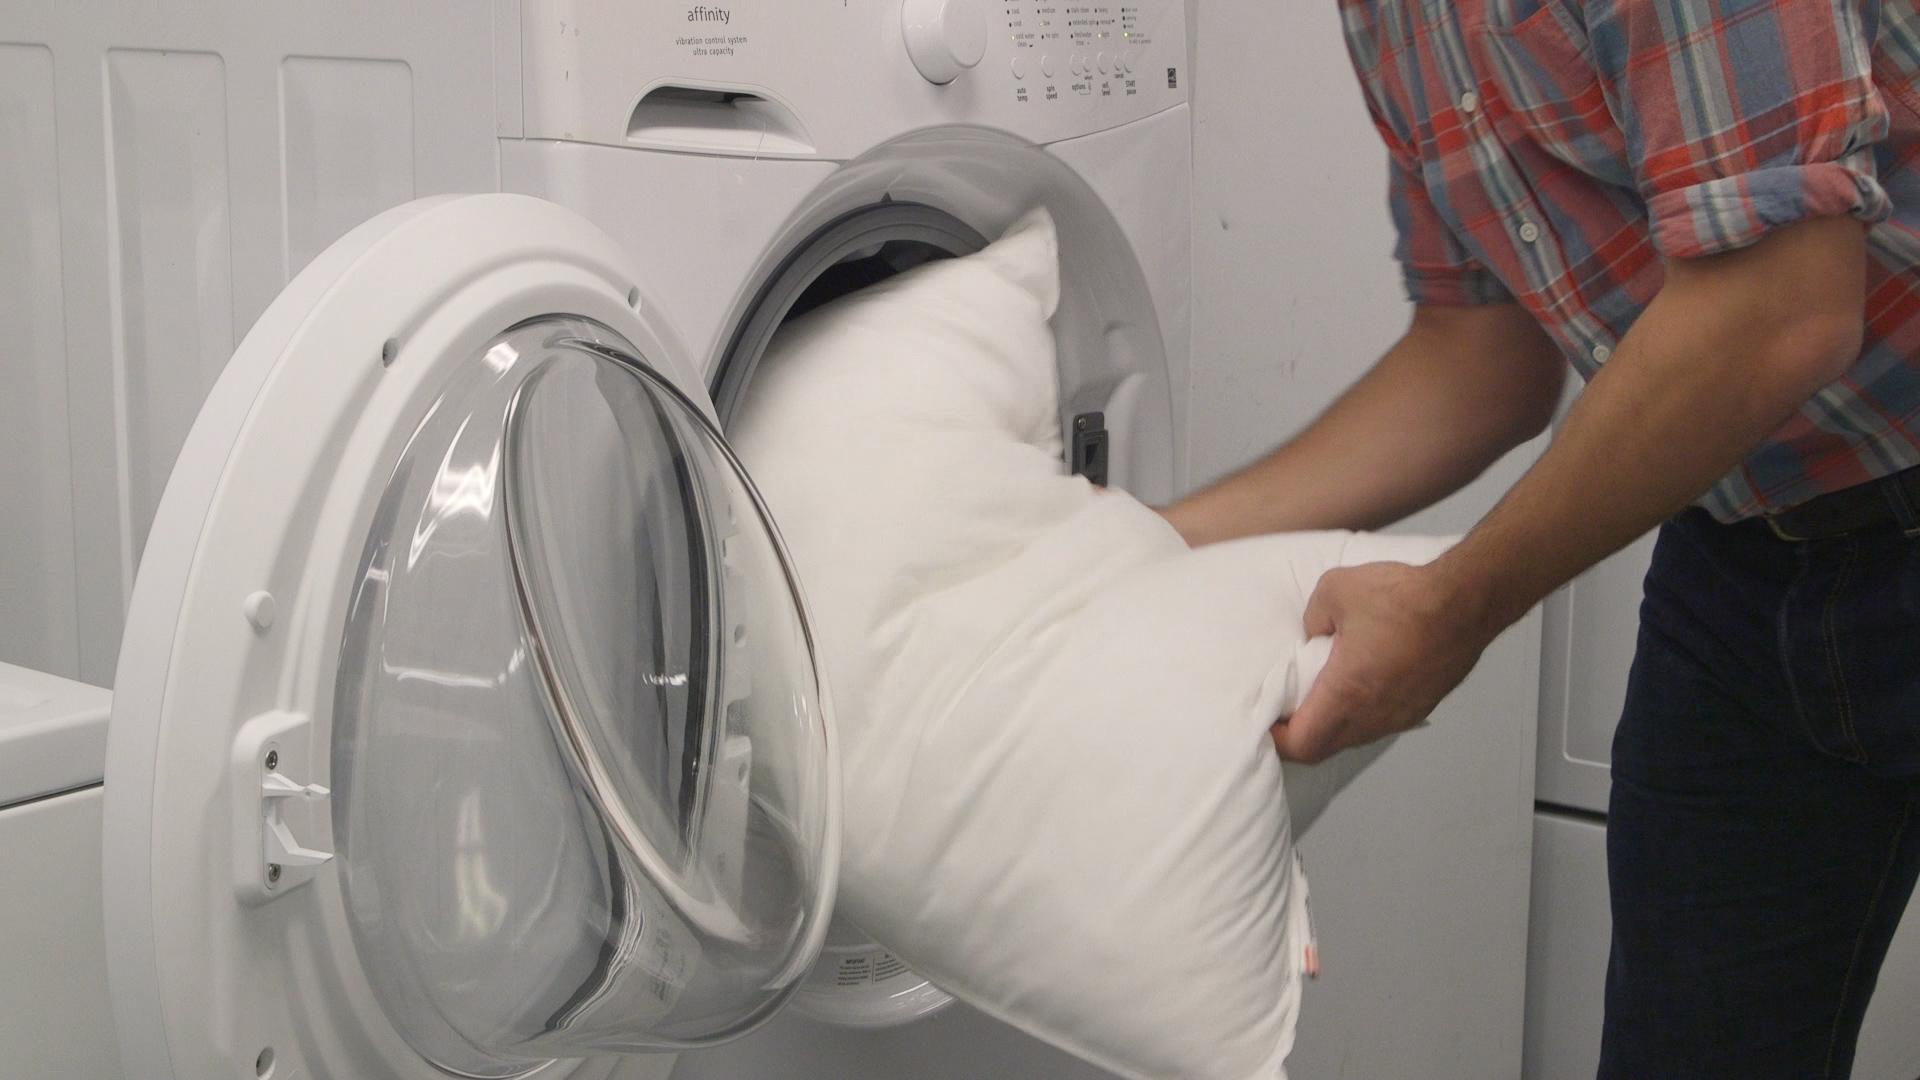 How to wash large pillows